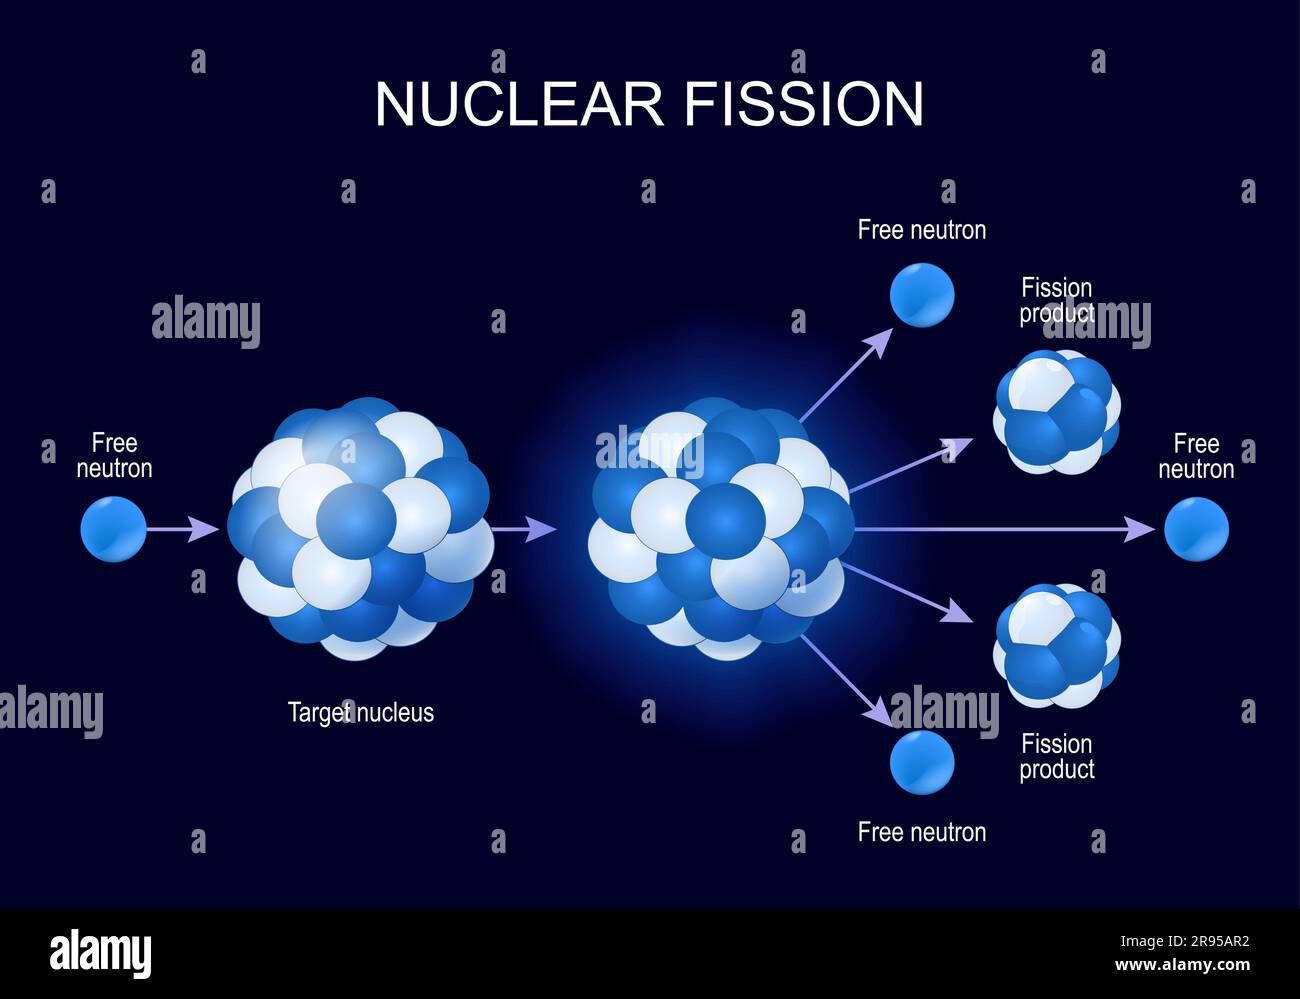 nuclear fission